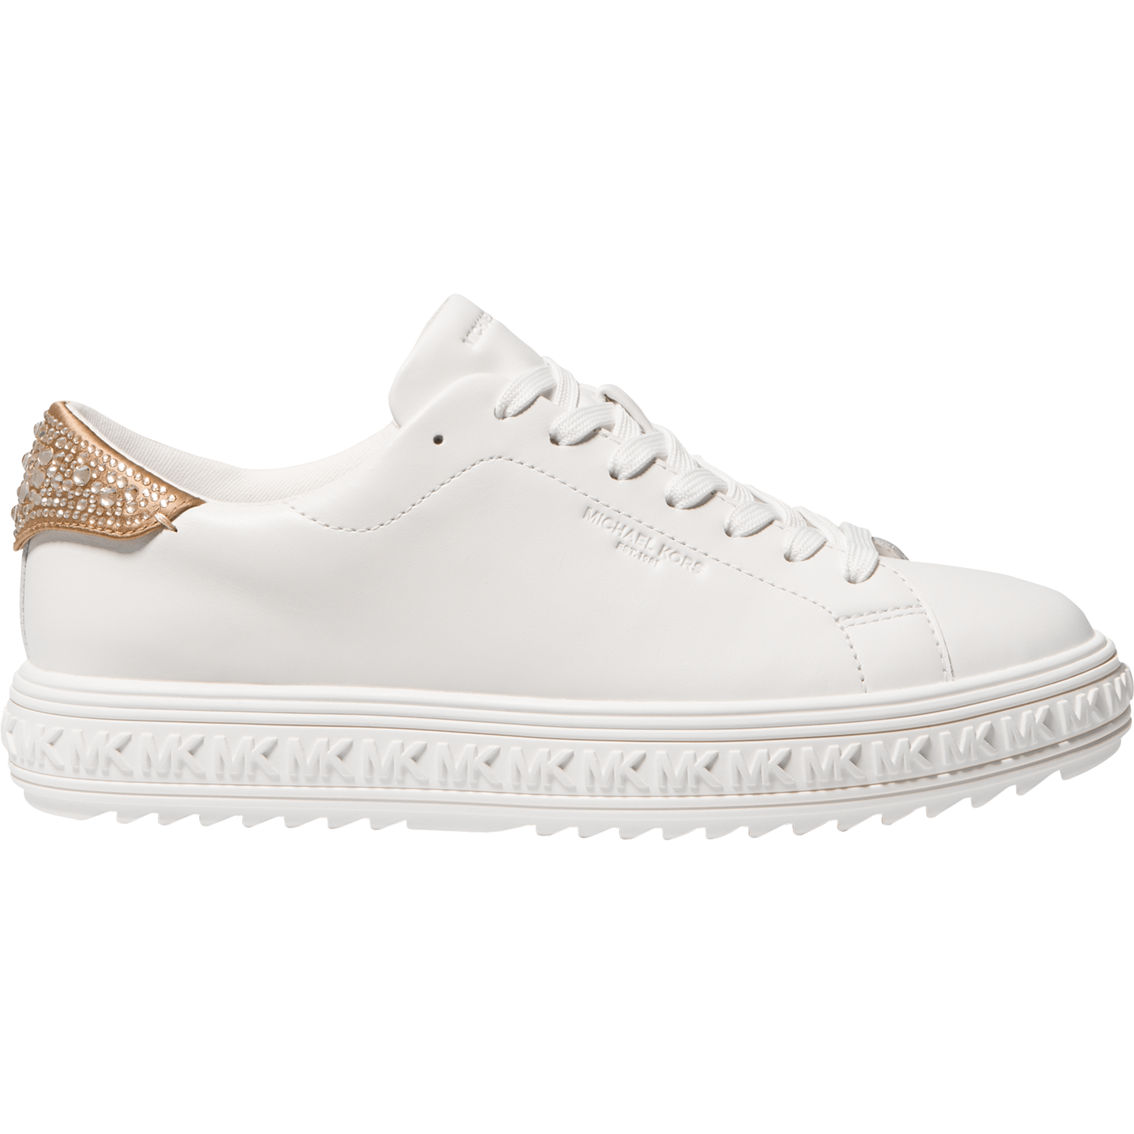 Michael Kors Grove Embellished Leather Sneakers - Image 2 of 4